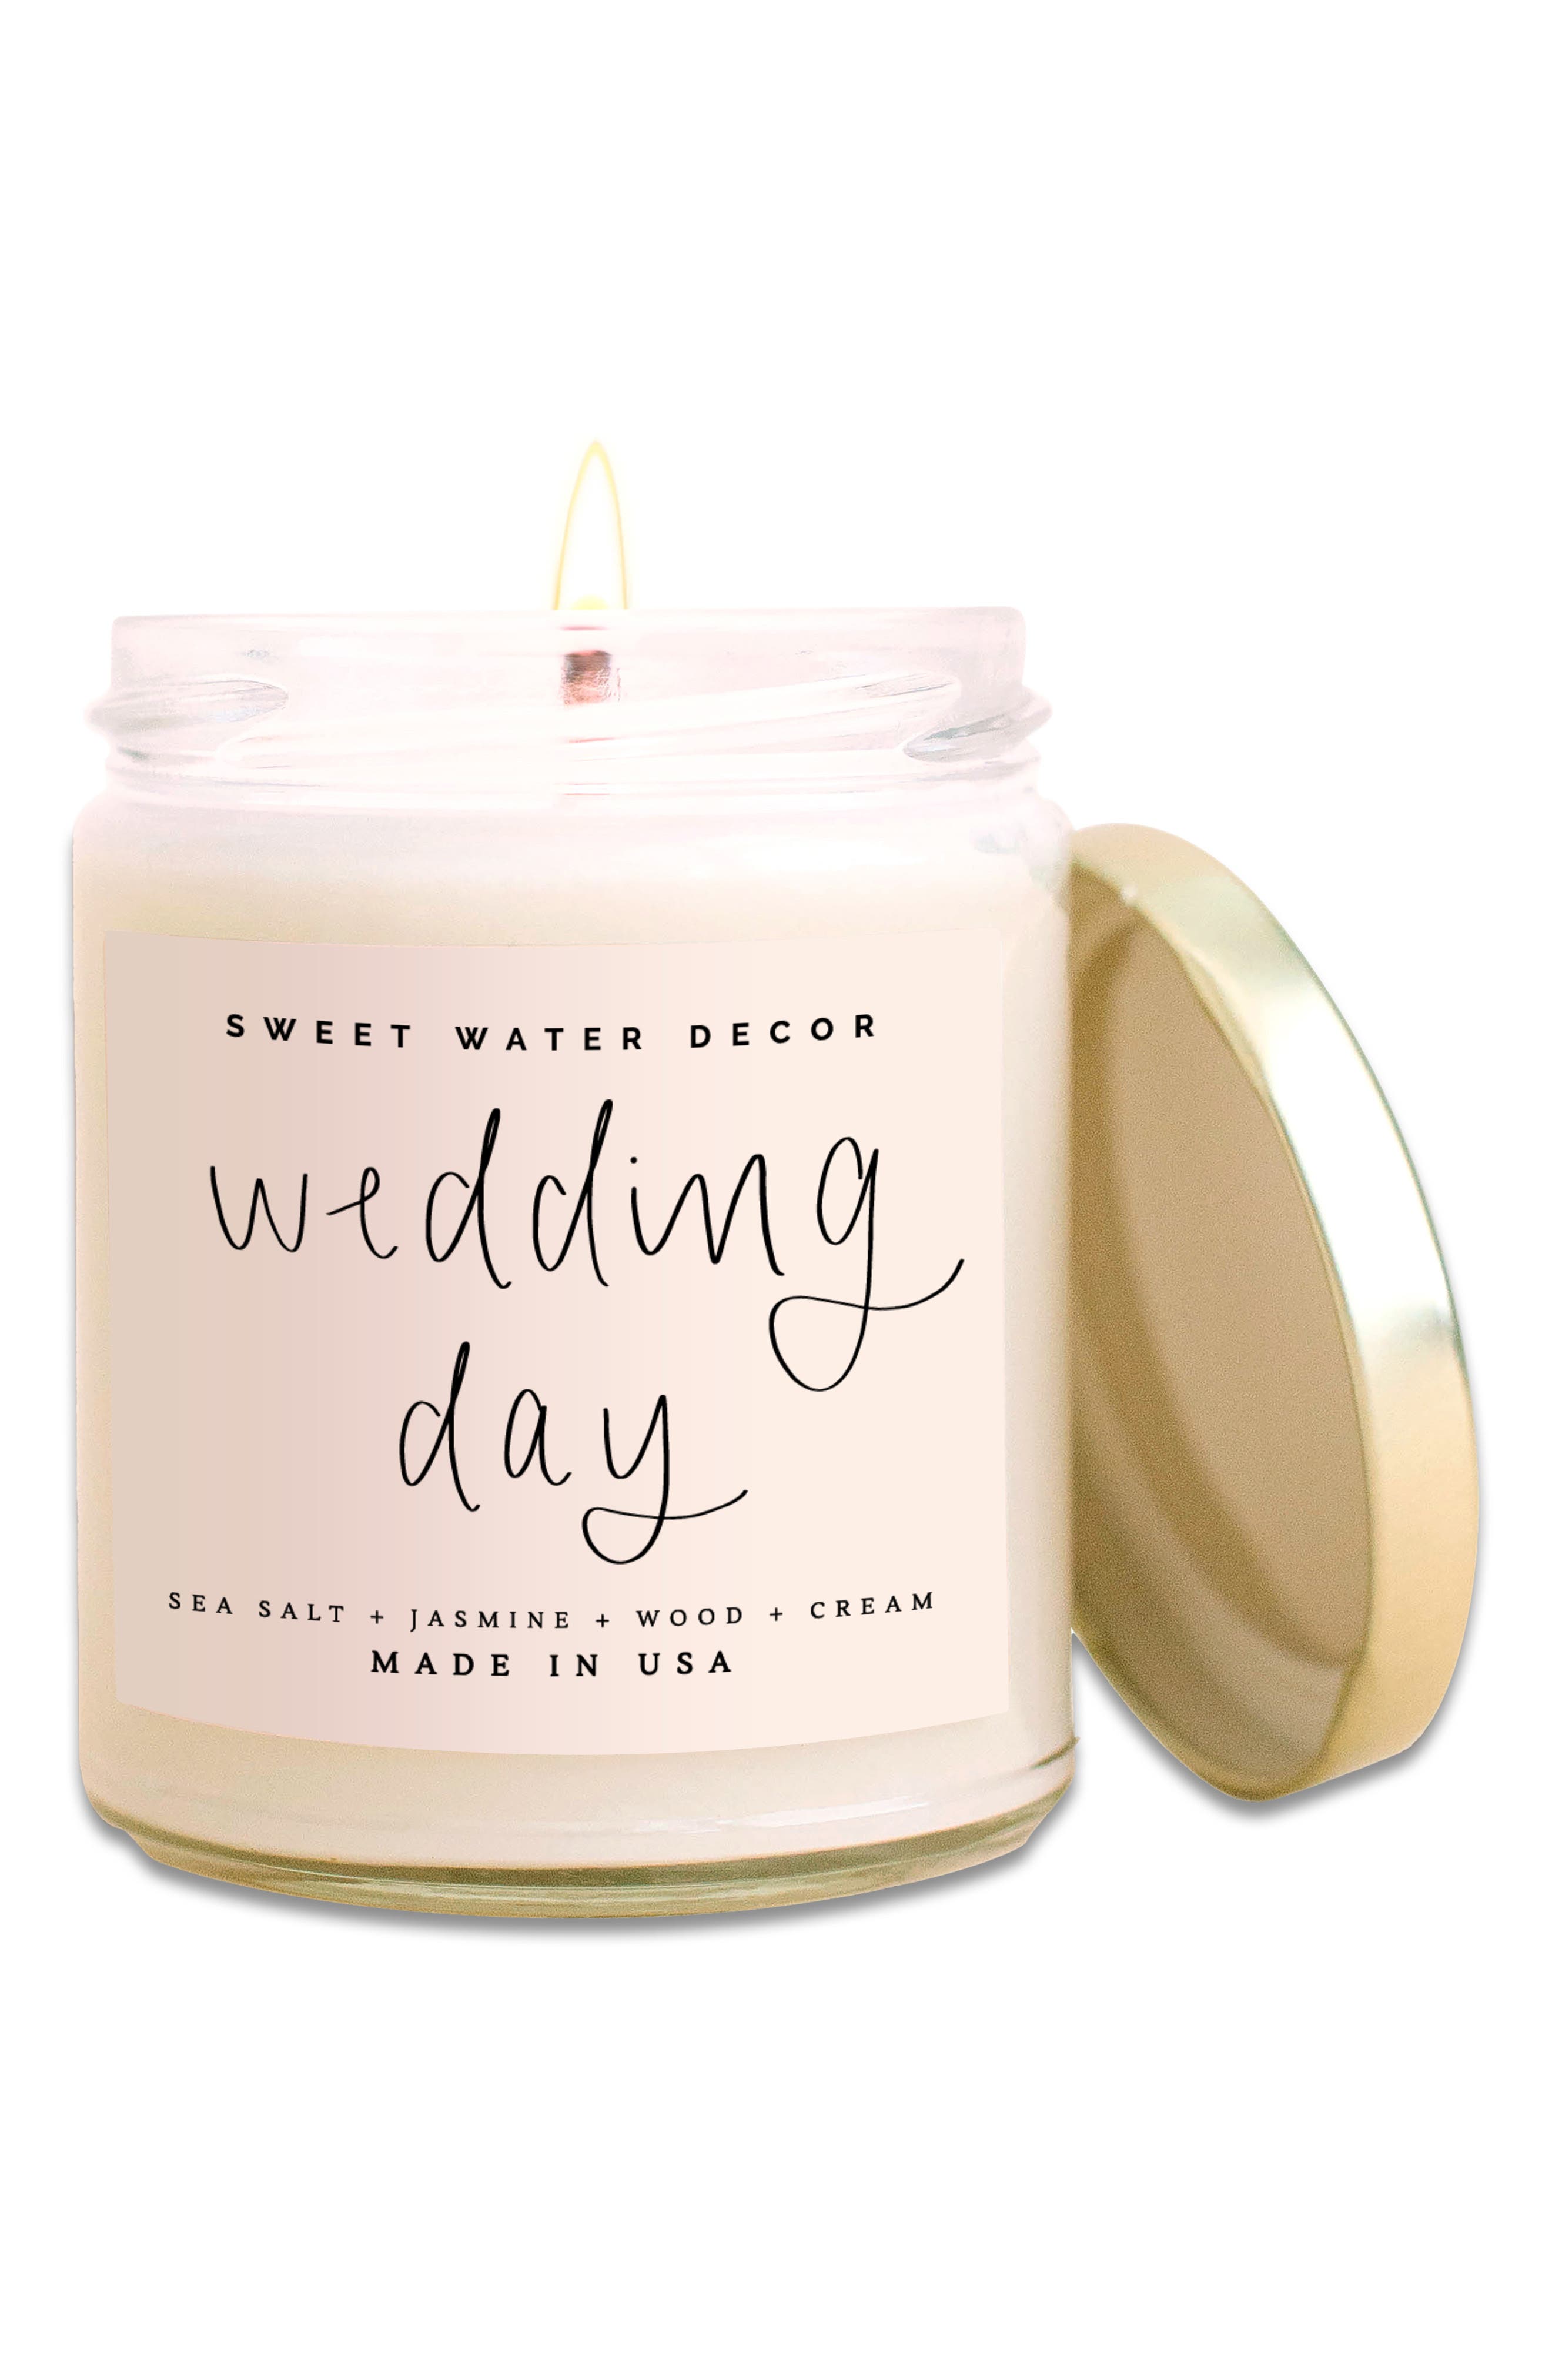 Wedding Day Scented Candle - 9 oz. SWEET WATER DECOR